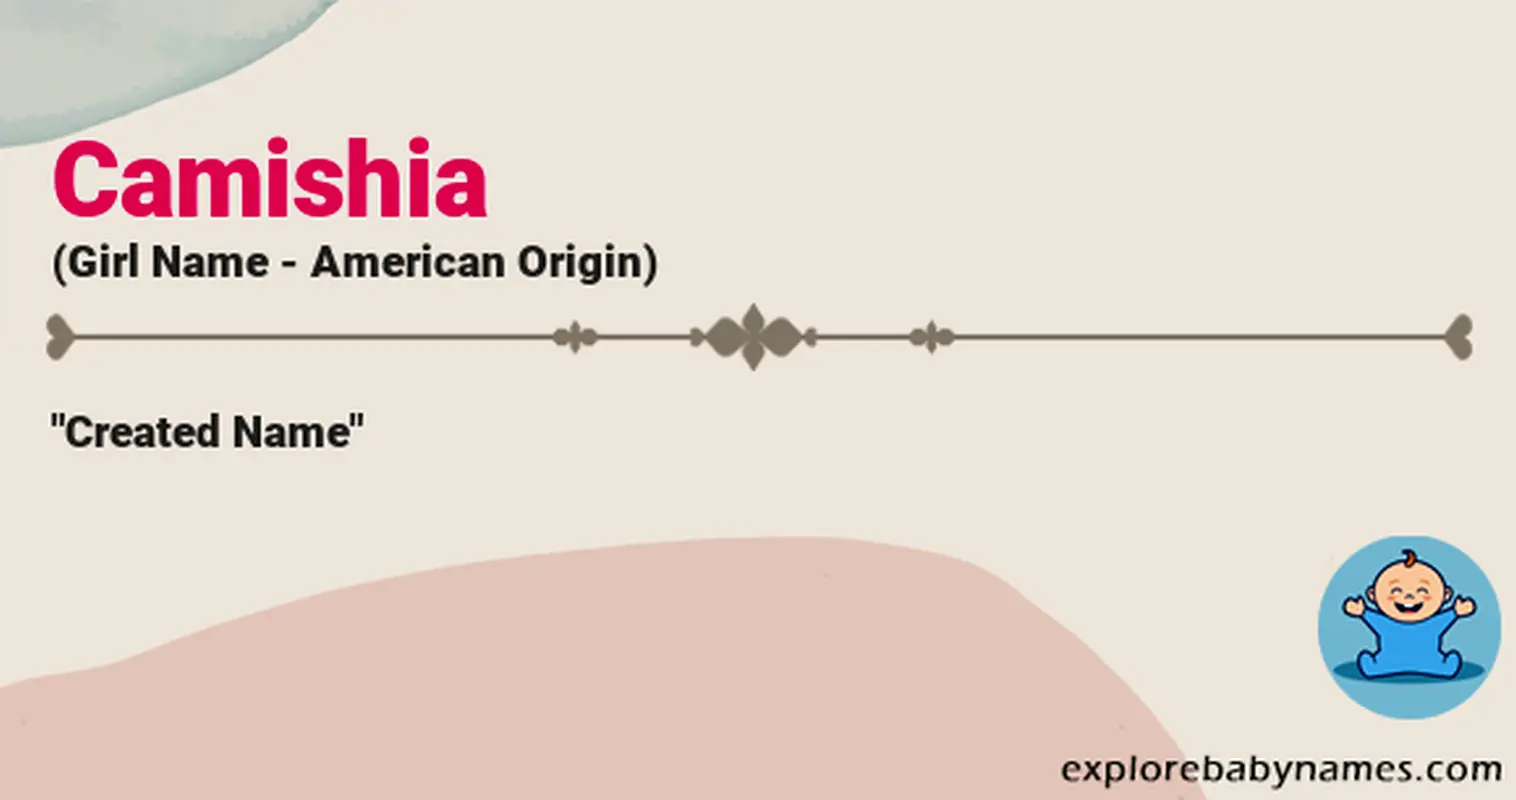 Meaning of Camishia